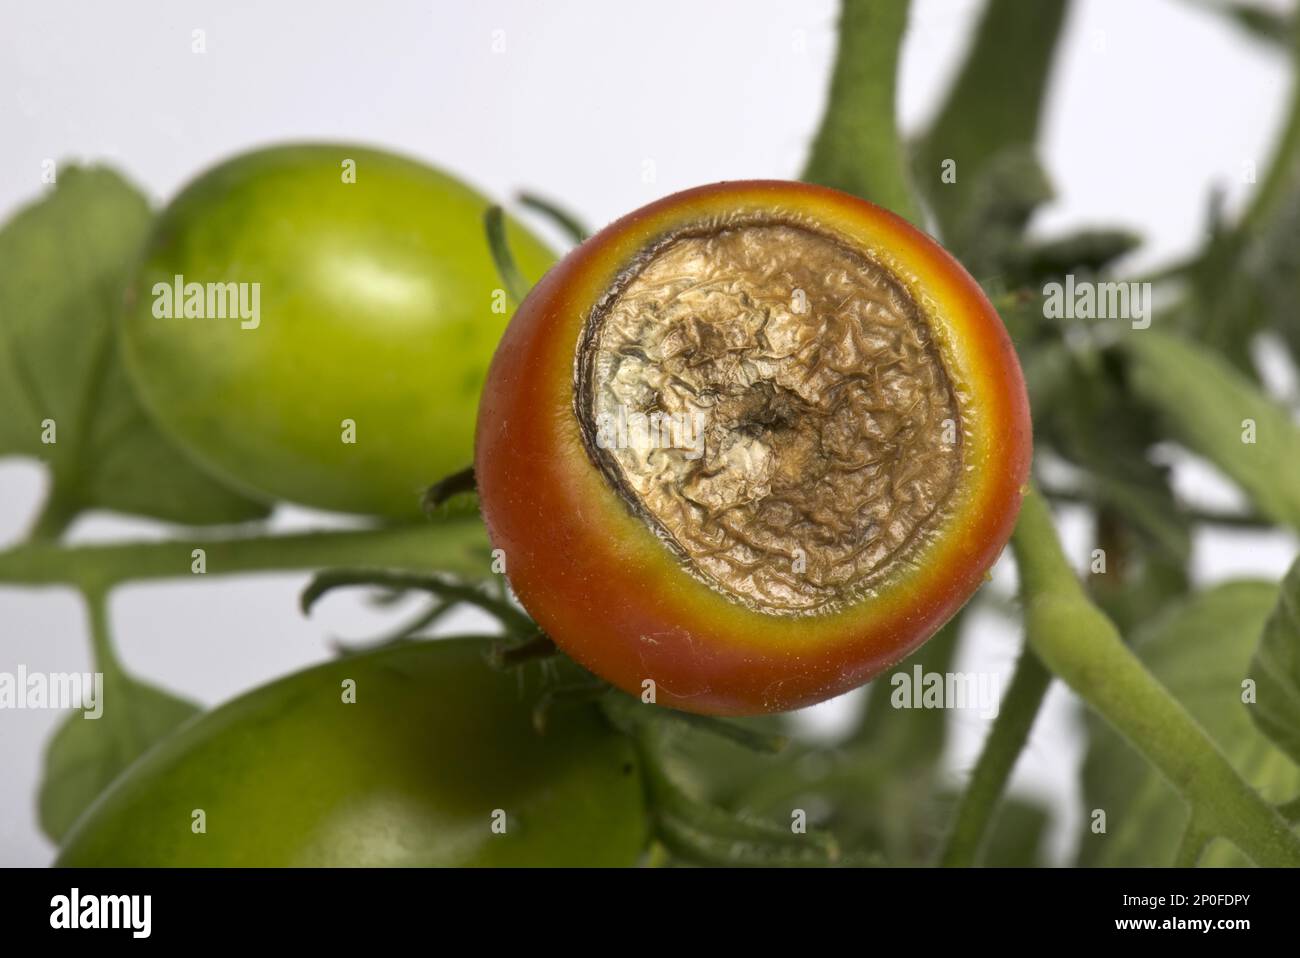 Blossom end rot, calcium deficiency symptoms on a greenhouse-grown tomato fruit Stock Photo